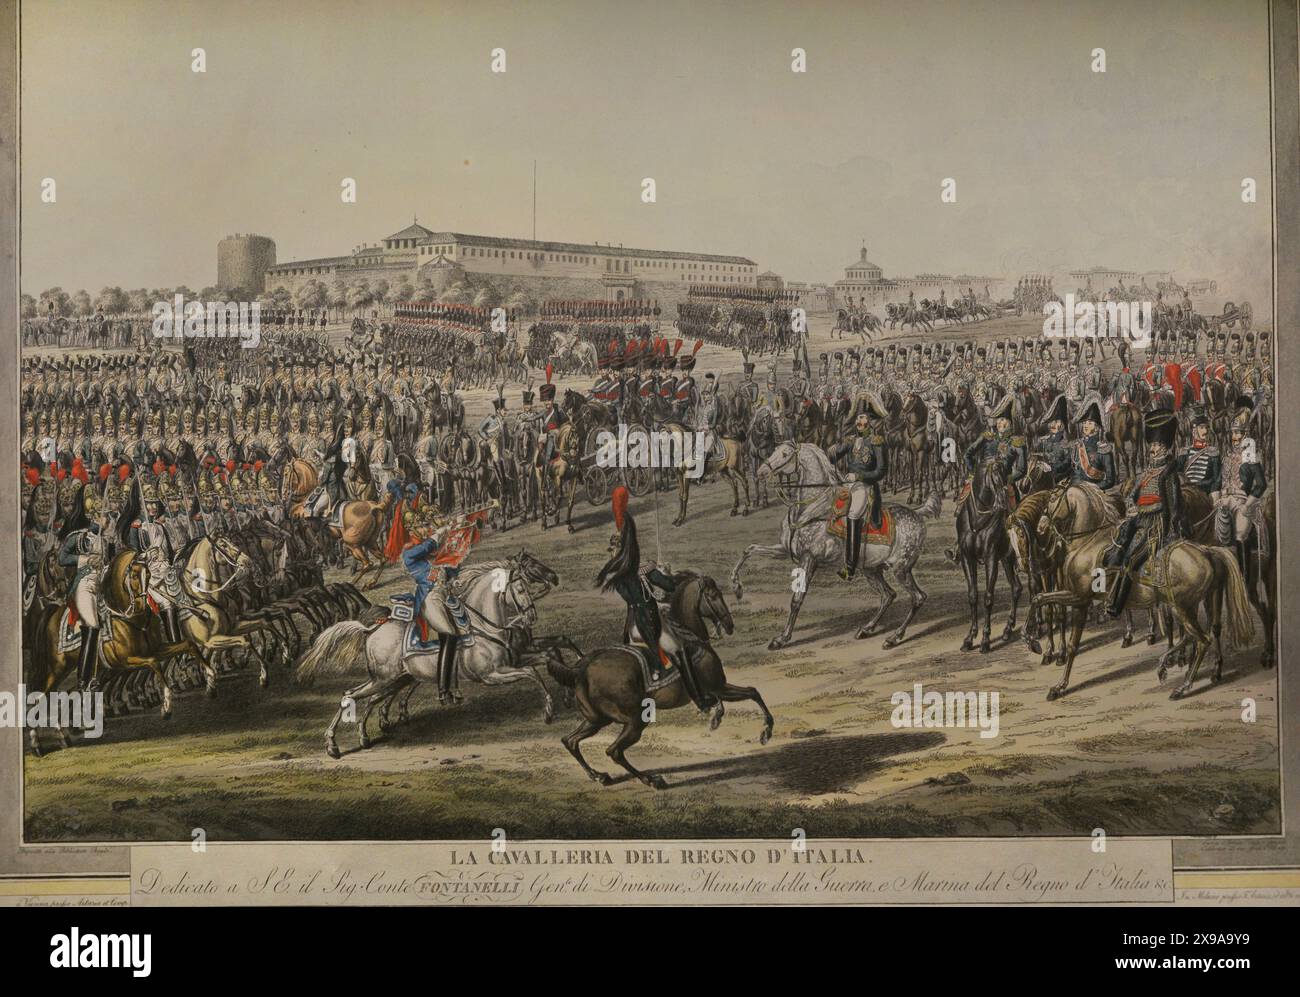 The Cavalry of the Kingdom of Italy, ca. 1811-1812. The scene begins on the parade ground of the Foro Bonaparte in the Castle of Milan. In the centre appears the Viceroy Eugène de Beauharnais (1781-1824), followed by the officers of his General Staff. Behind him a formation of Royal Guards of Honour. The parade is opened by the officer and the two trumpets of the Dragoons of the Royal Guard, followed by the troops: the regiments Dragoni Regina, Dragoni Napoleone and the Artillery of the Royal Guard escorting the cannons towed by the Artillery Train of the Guard. In the background can be seen t Stock Photo